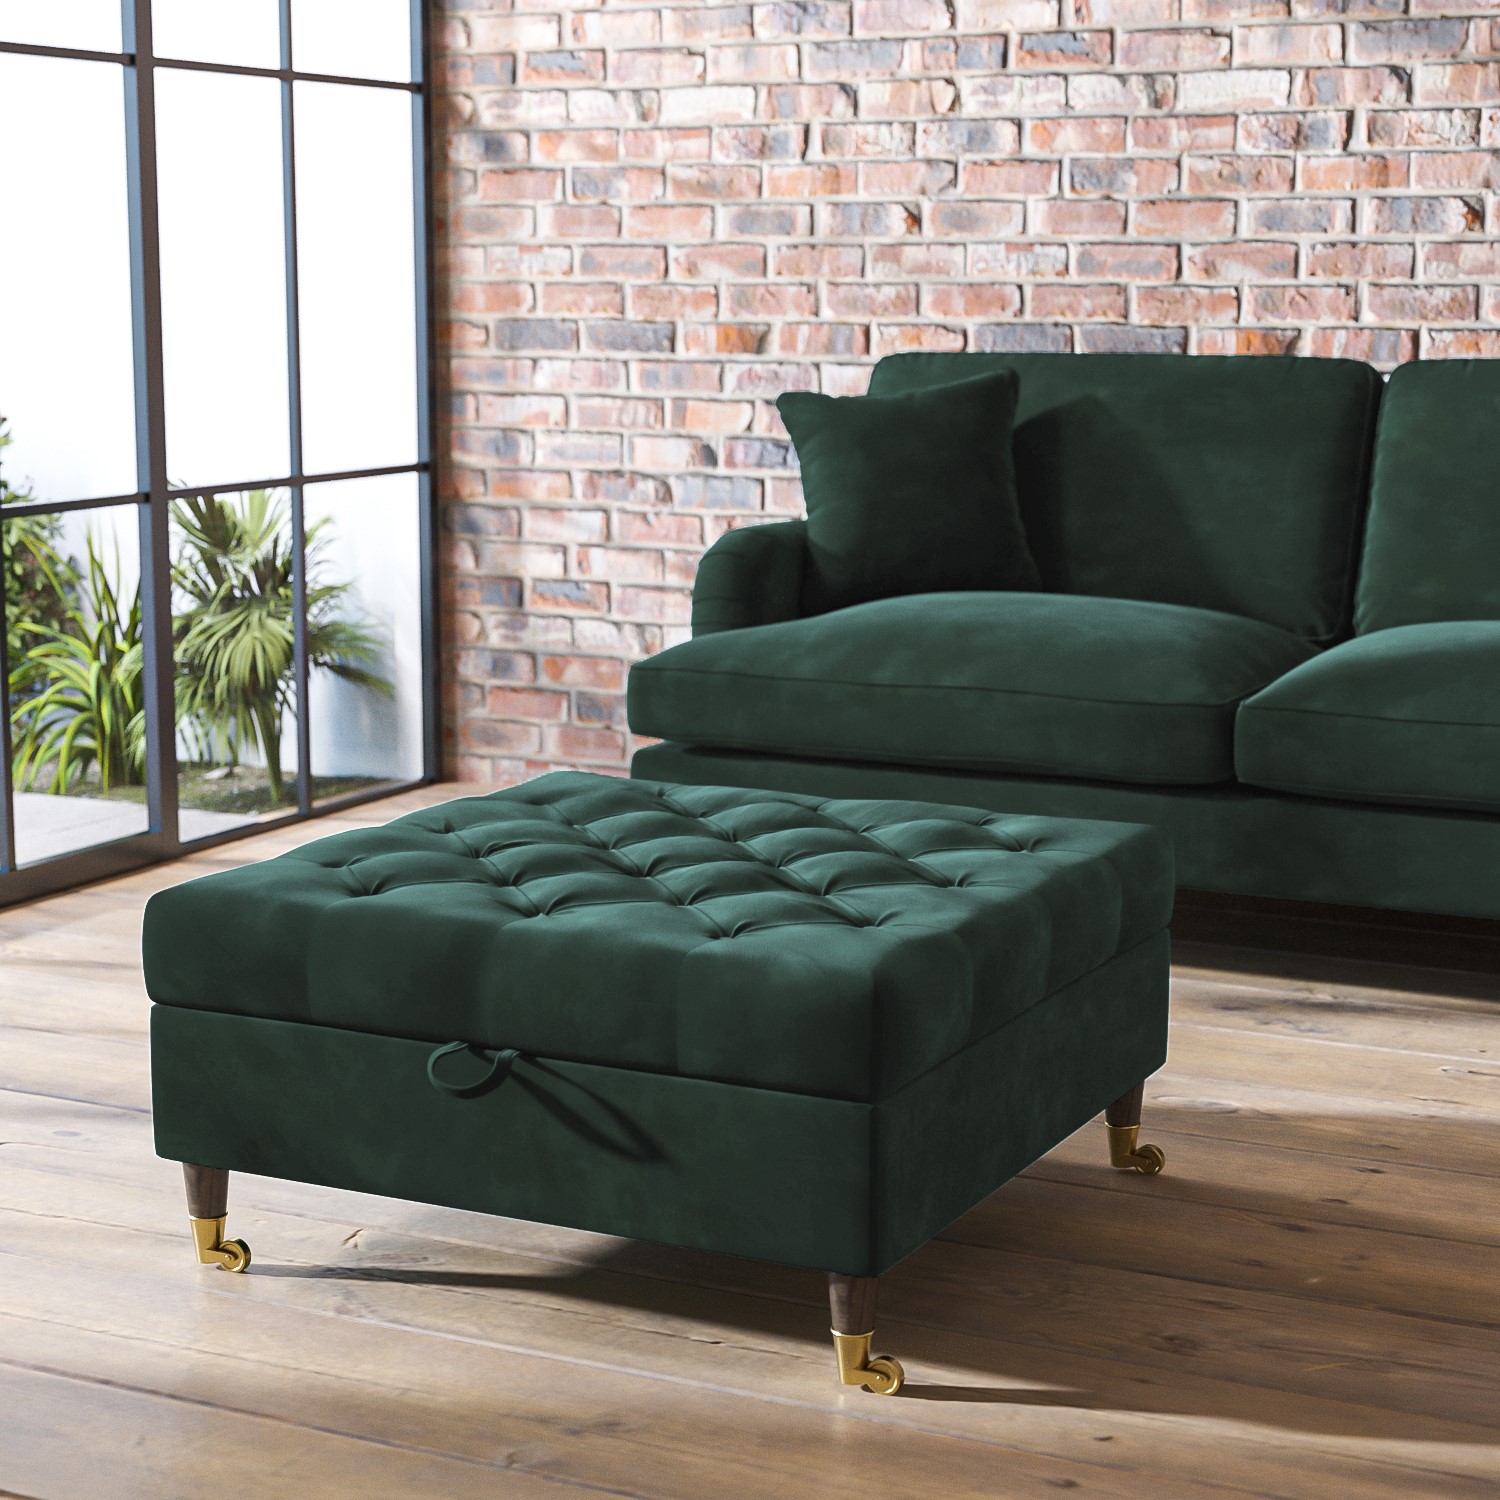 Read more about Large green velvet buttoned ottoman storage footstool payton